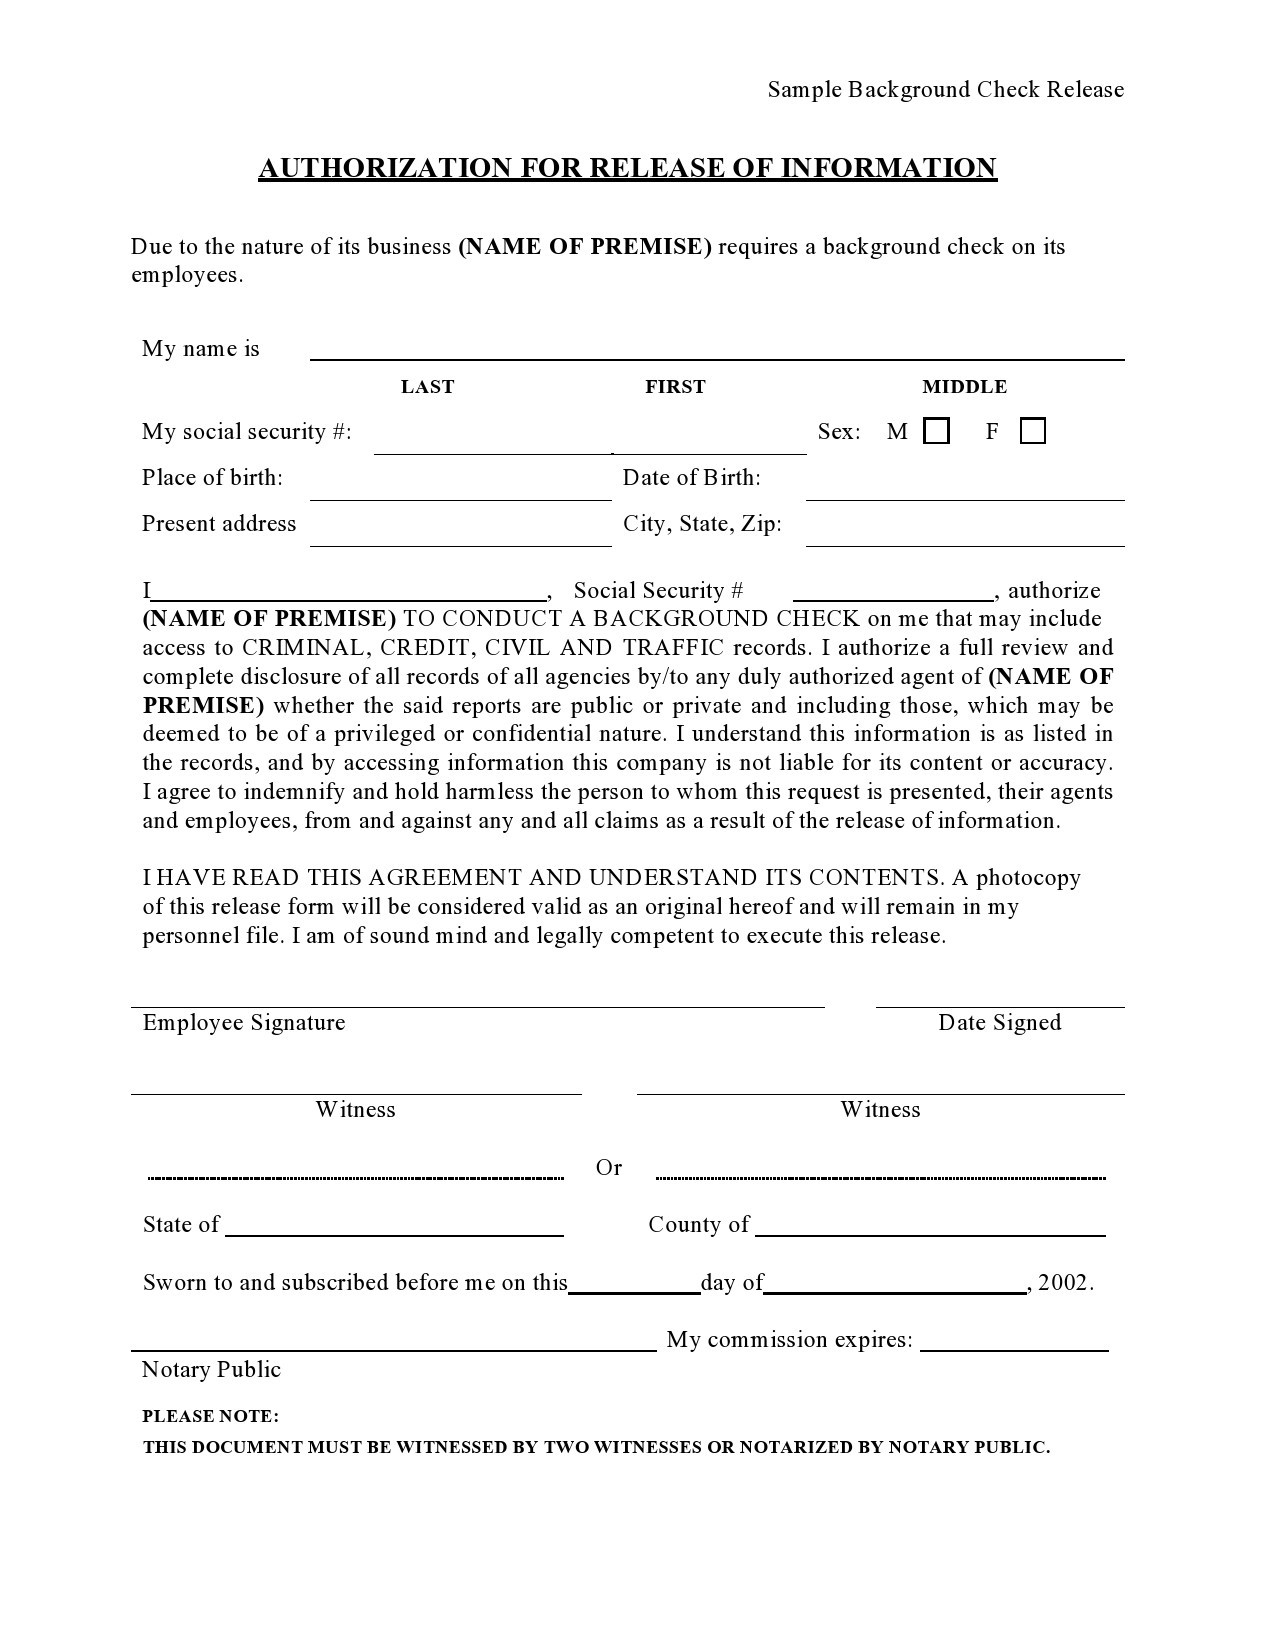 Free background check form 46